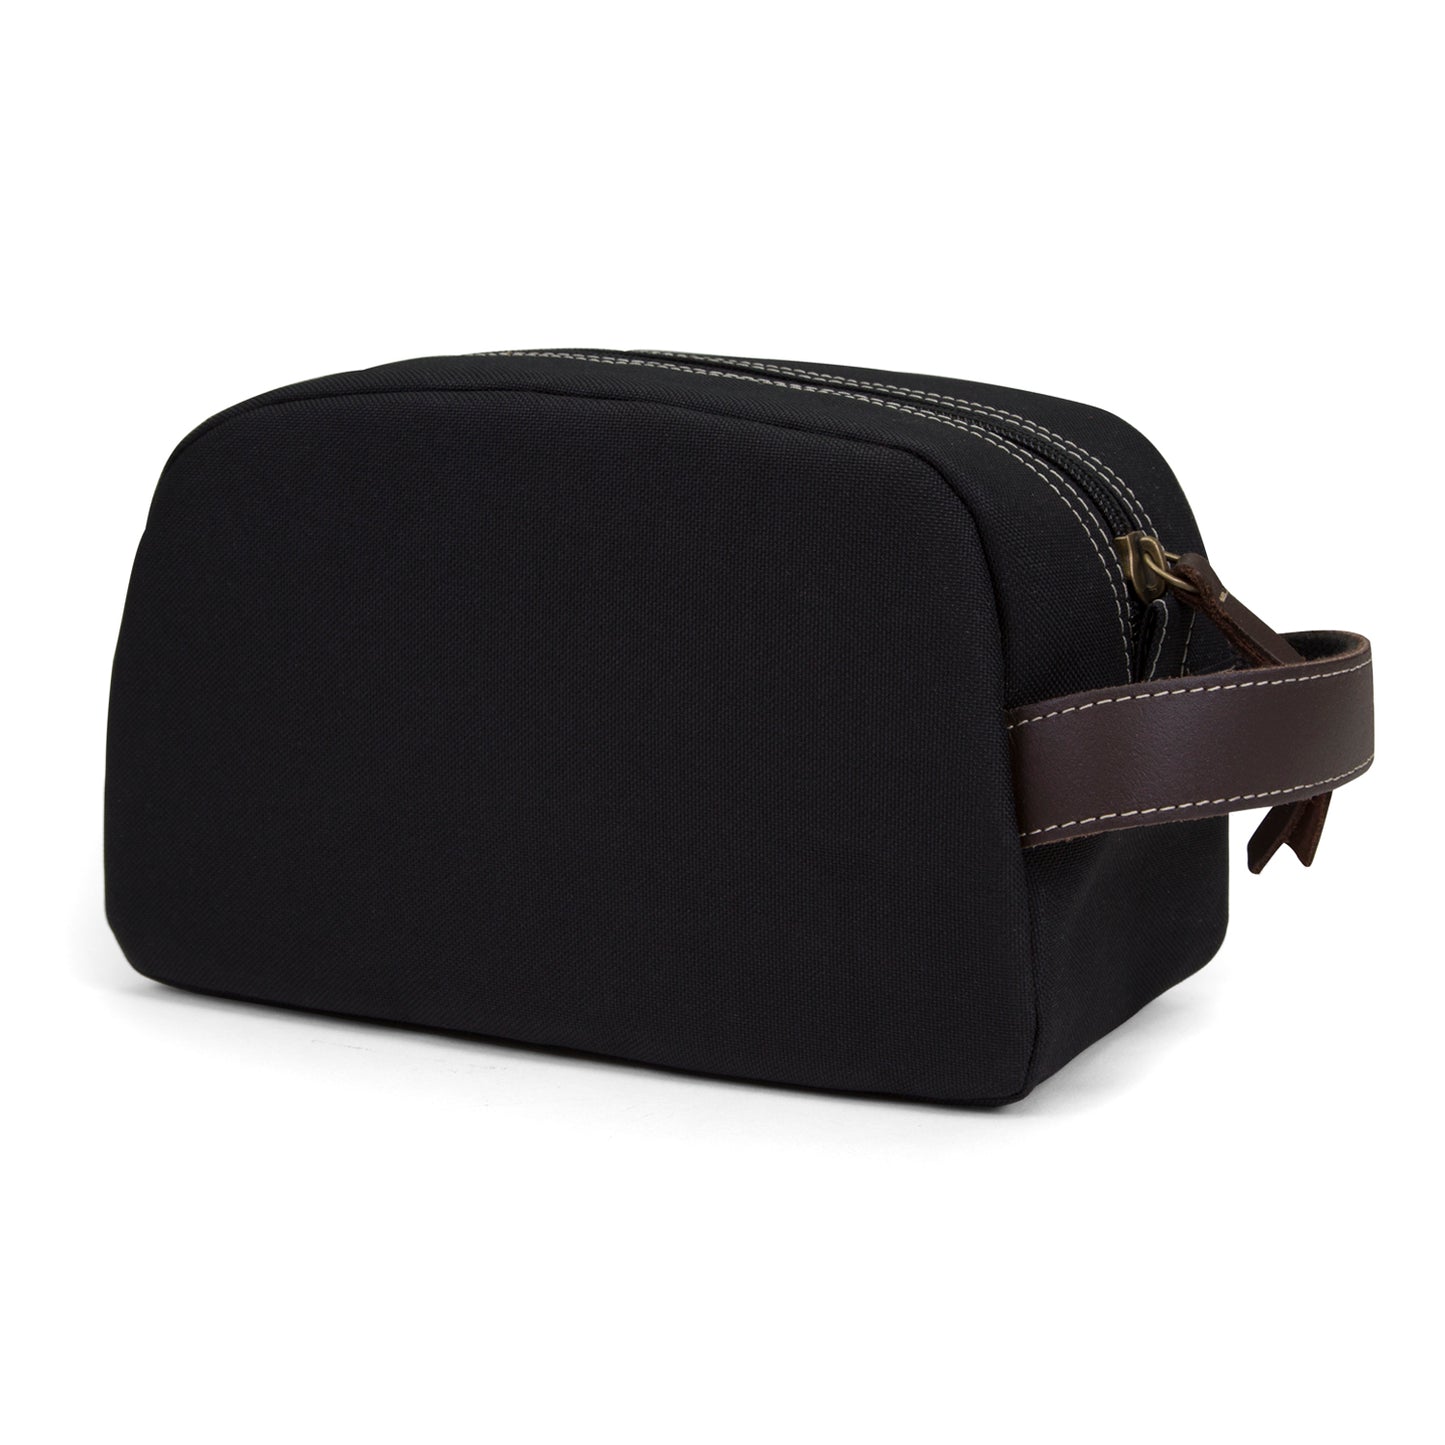 Black Timberland travel kit with side handle, zip top closure and exterior zipped front pocket